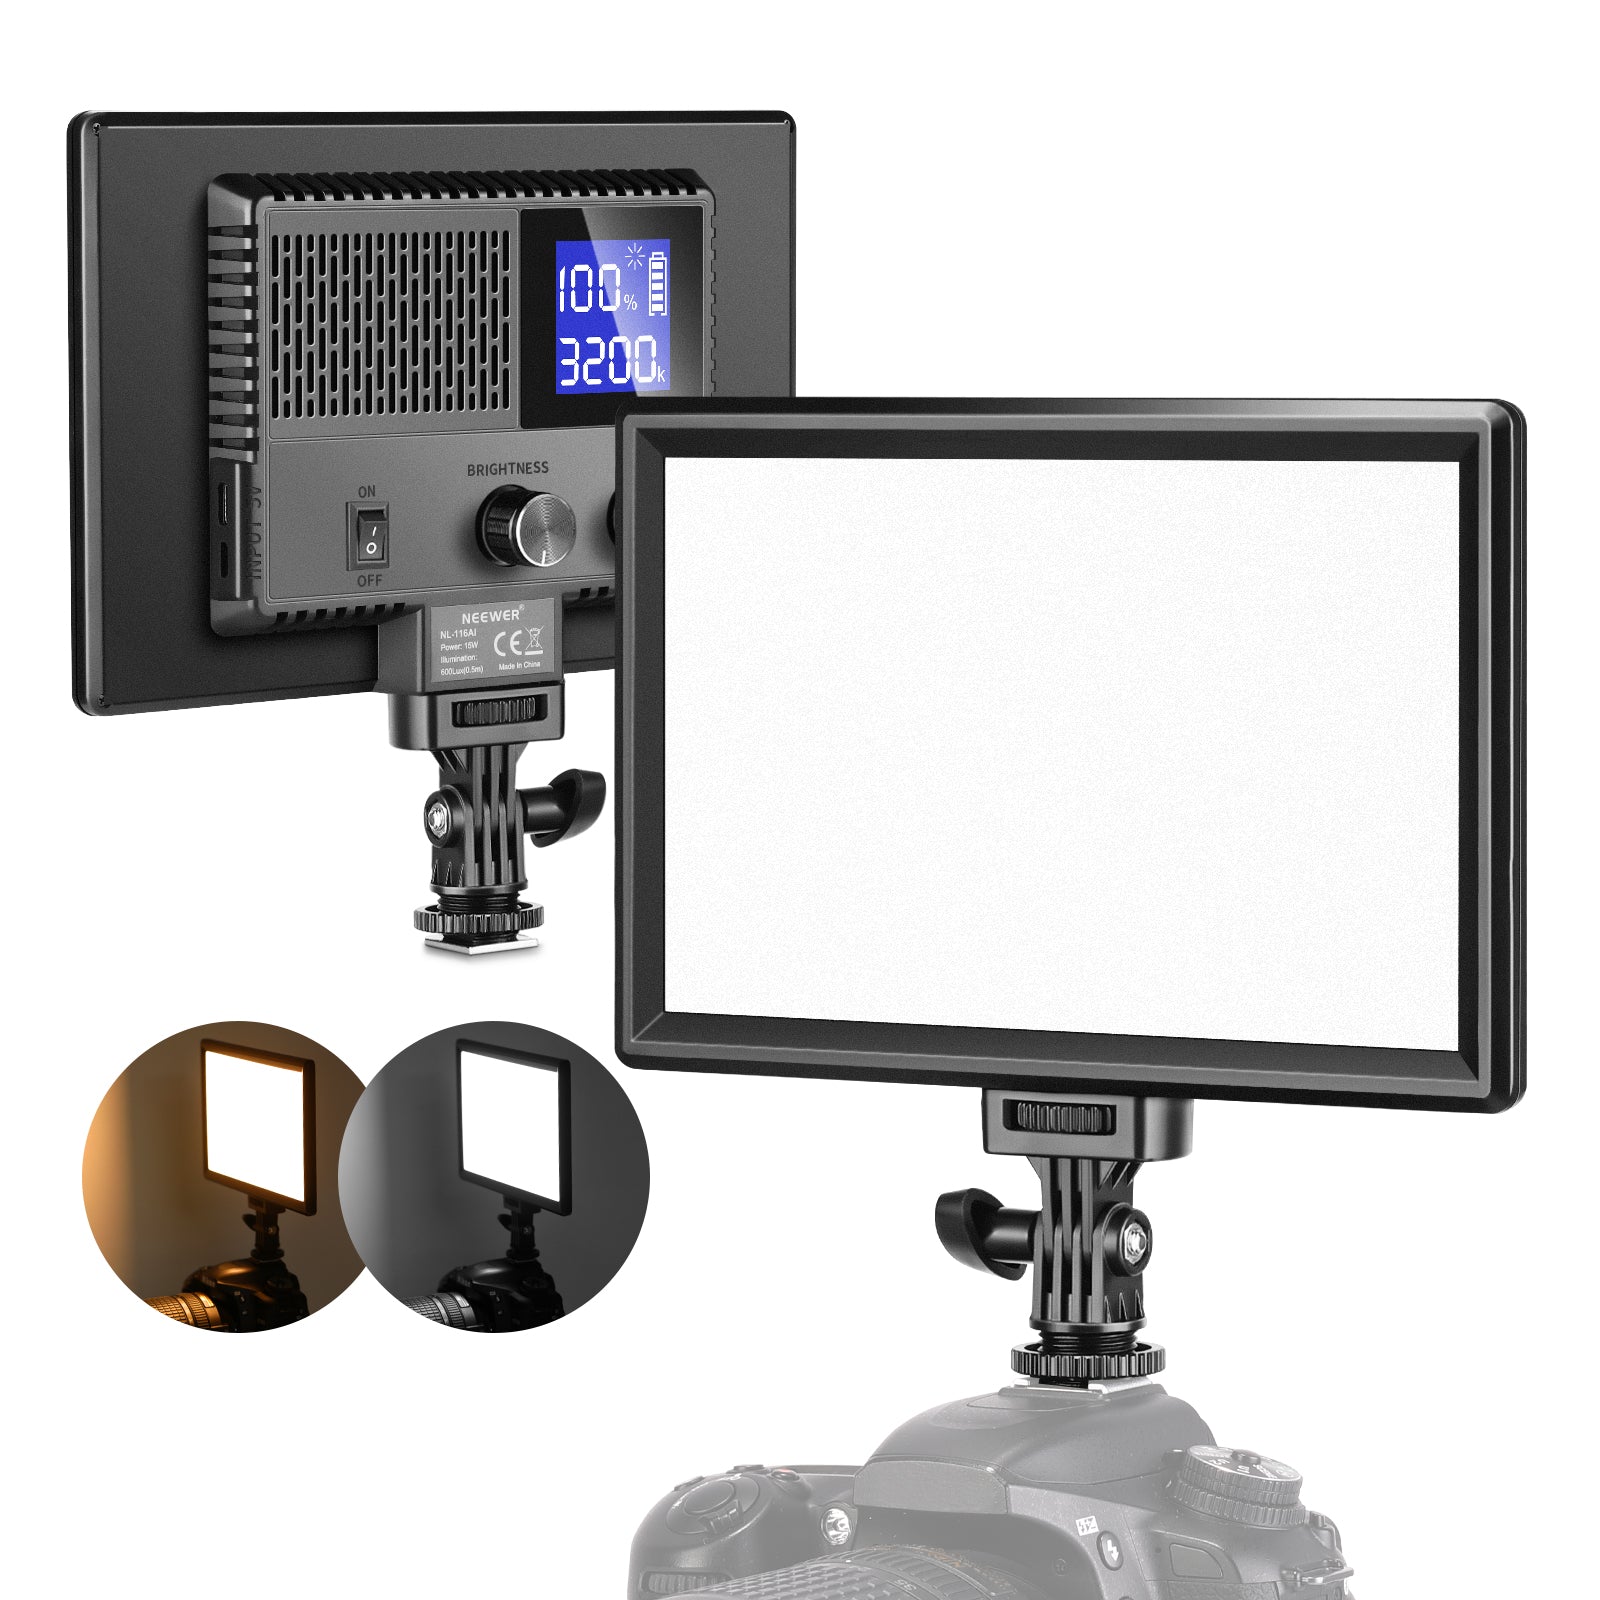 NEEWER NL-116AI LED Video Light with Built-in Rechargeable Battery